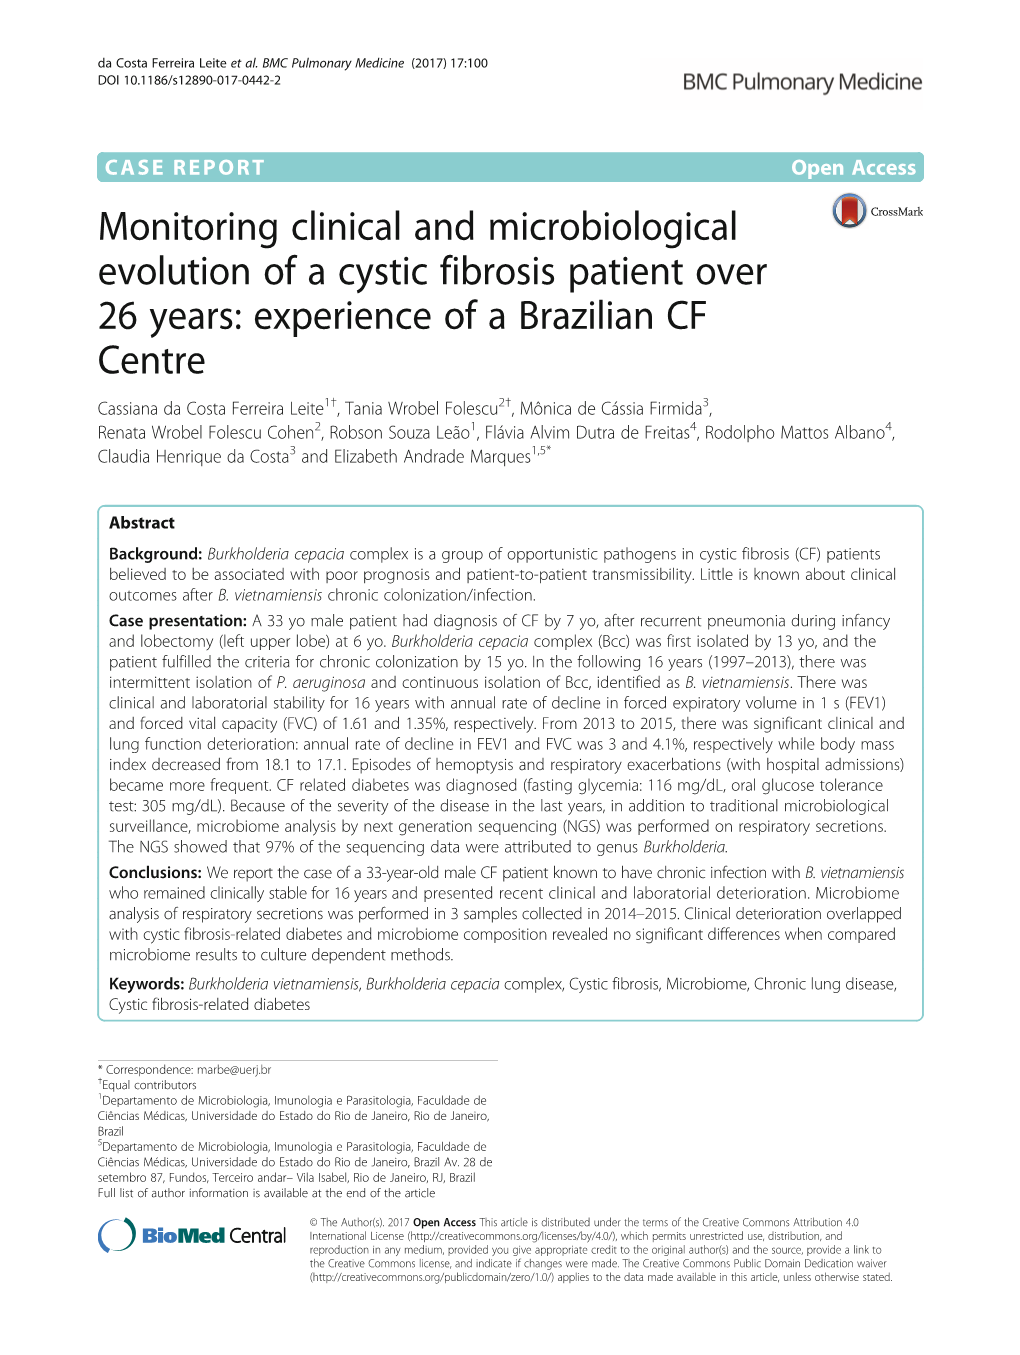 Monitoring Clinical and Microbiological Evolution of a Cystic Fibrosis Patient